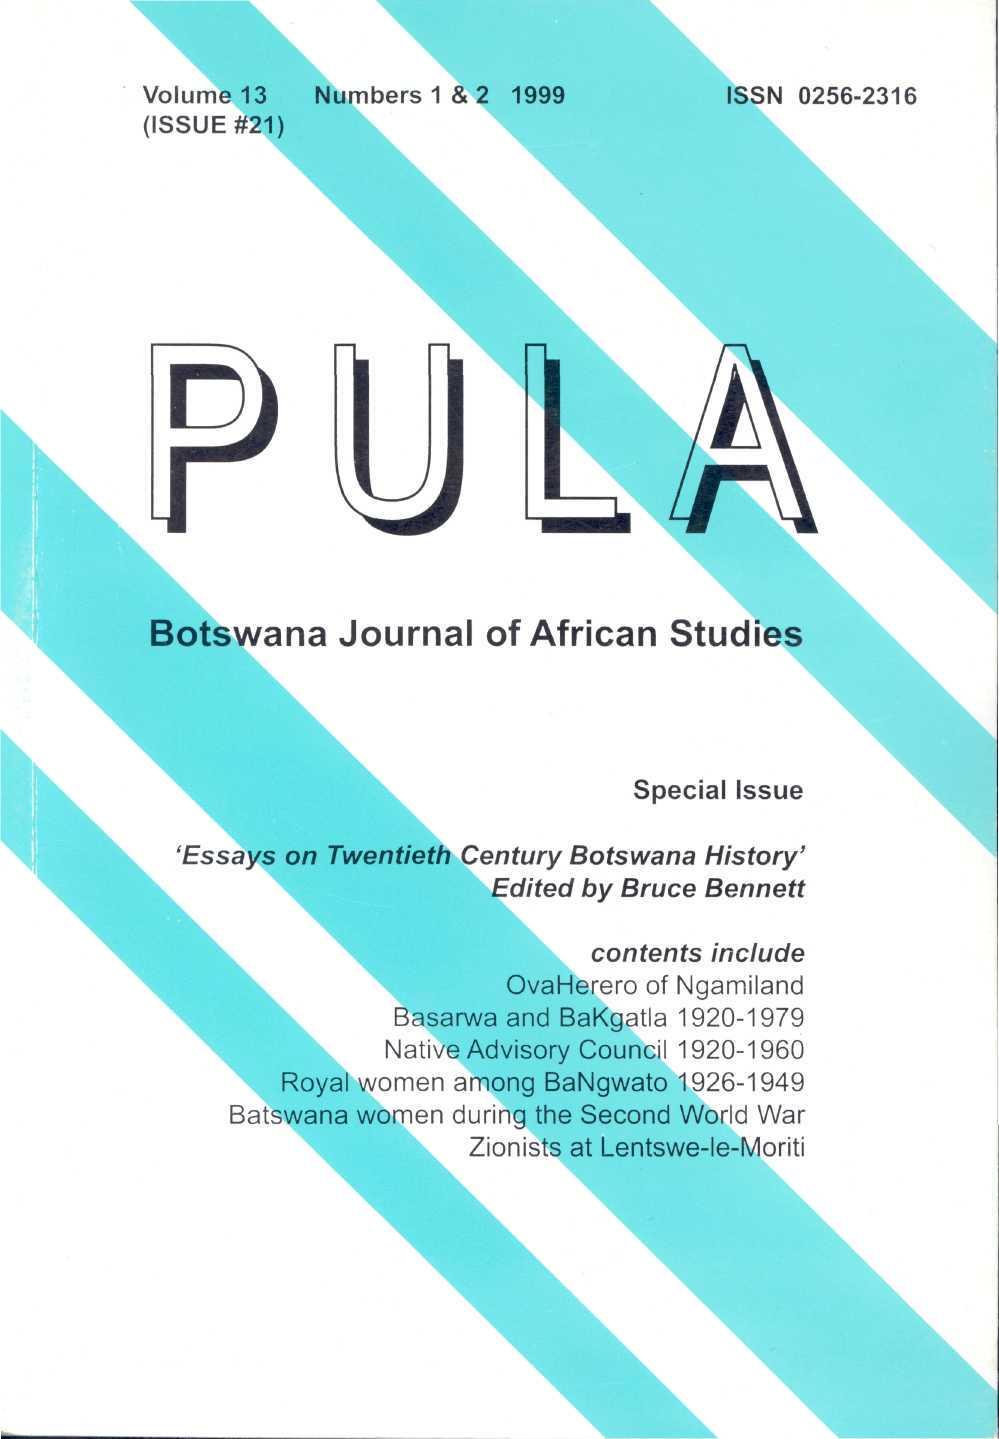 Volume 13 Numbers 1 & 2 1999 (ISSUE #21) ISSN 0256-2316 Botswana Journal of African Studies Special Issue 'Essays on Twentieth Century Botswana History' Edited by Bruce Bennett contents include